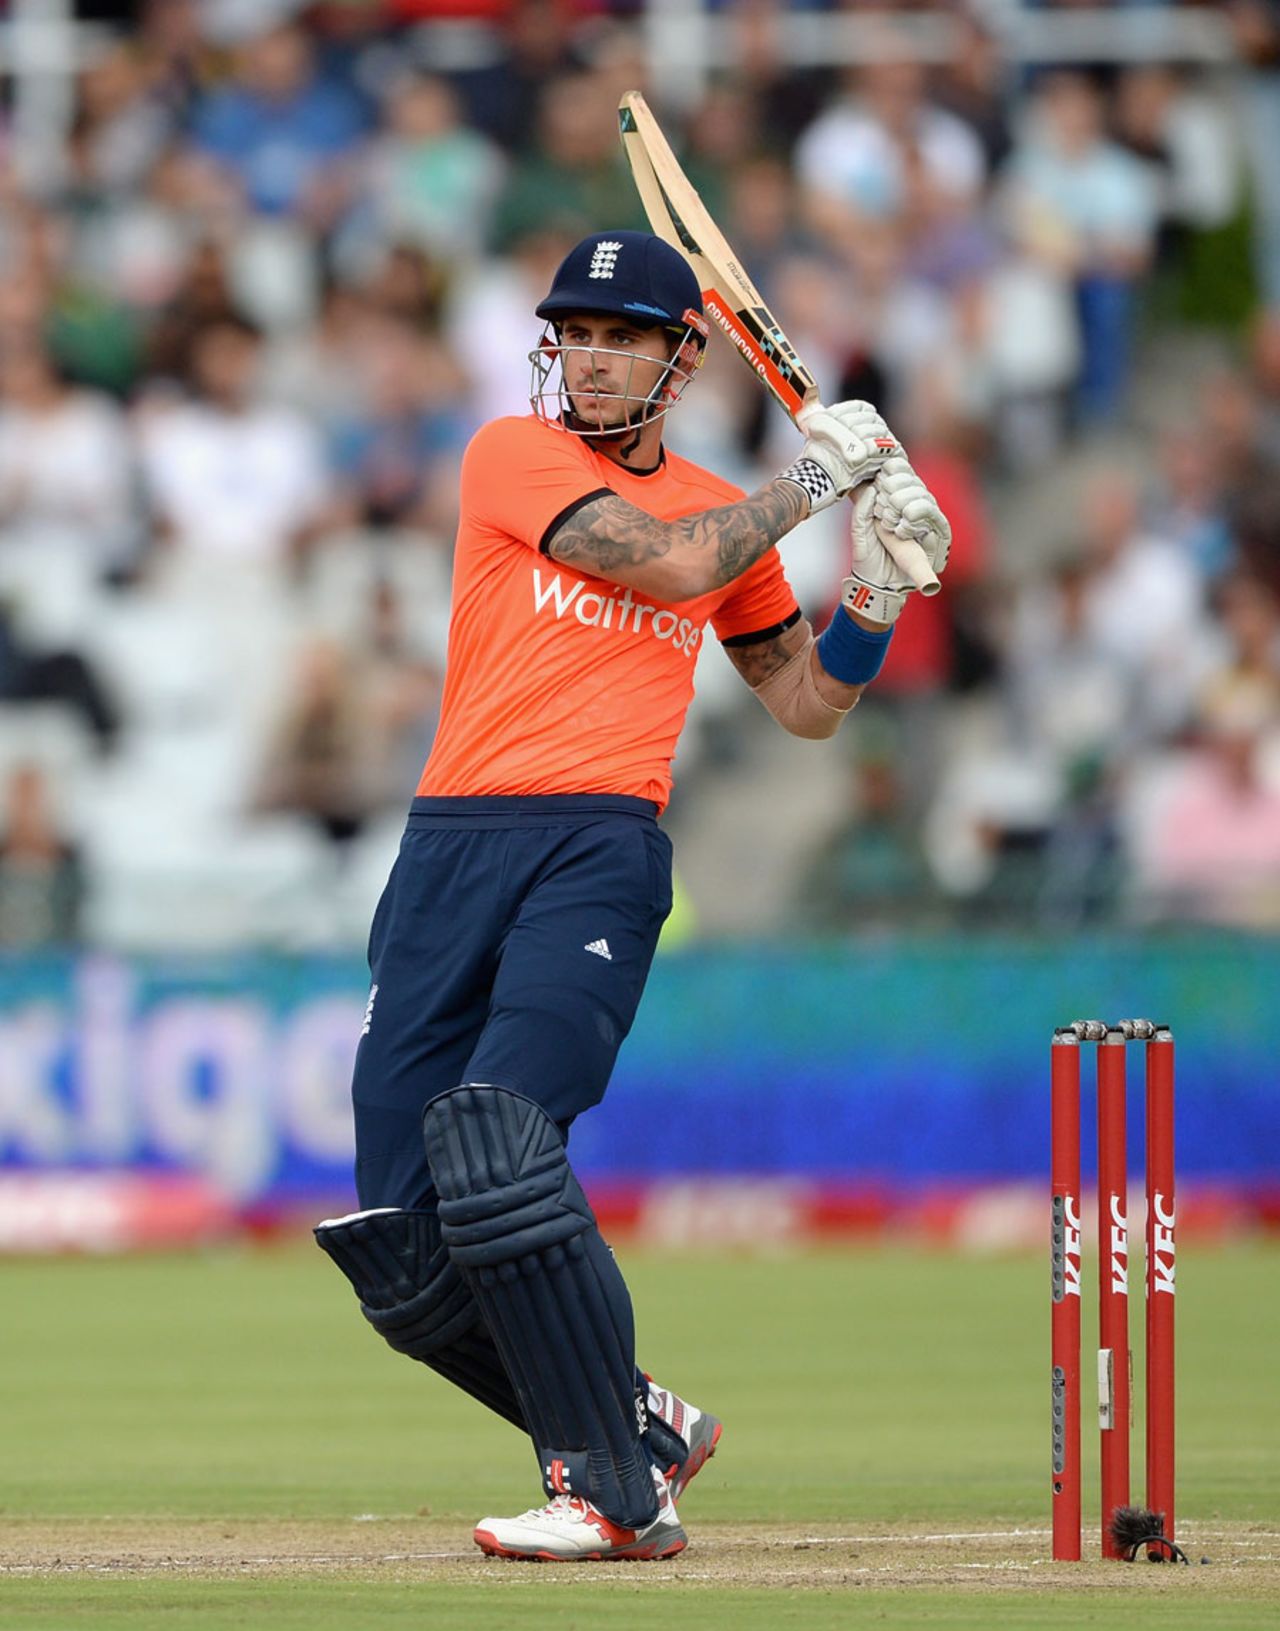 Alex Hales helped get England off to a good start, South Africa v England, 1st T20, Cape Town, February 19, 2016